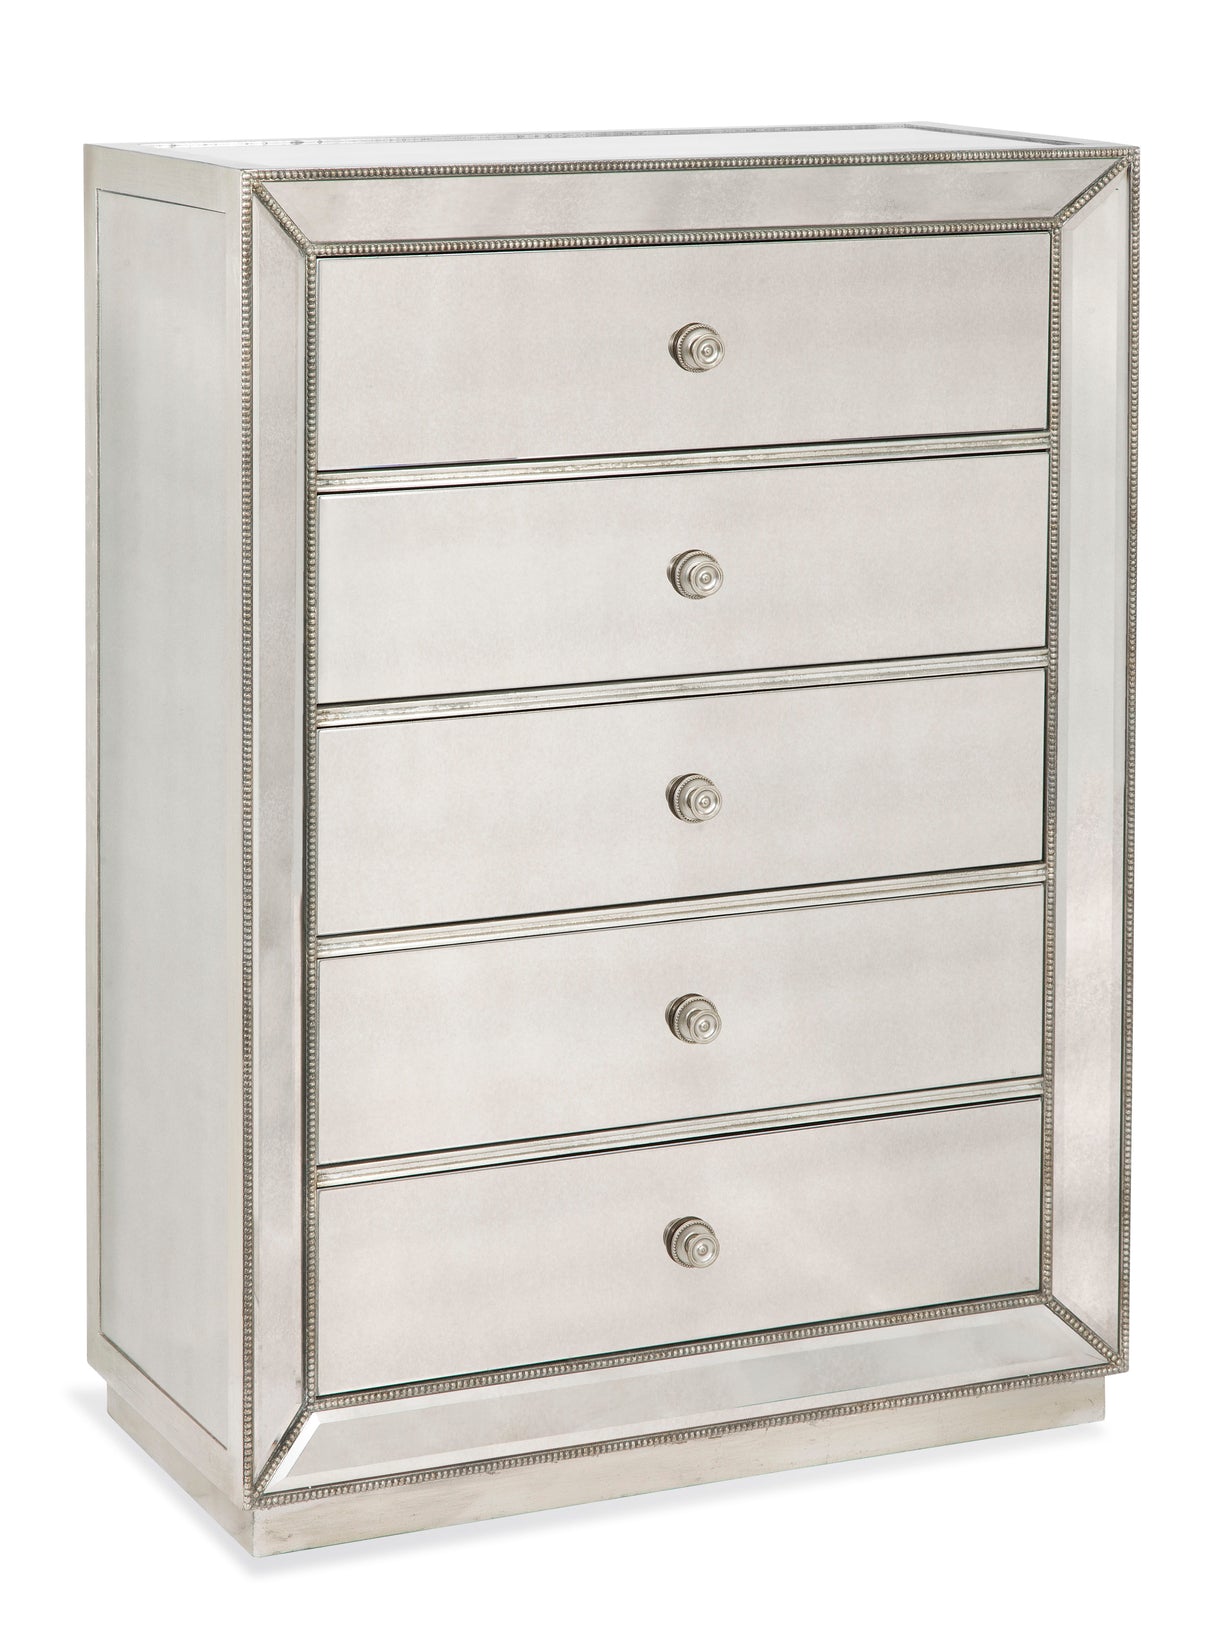 Murano - 5 Drawer Chest - Silver